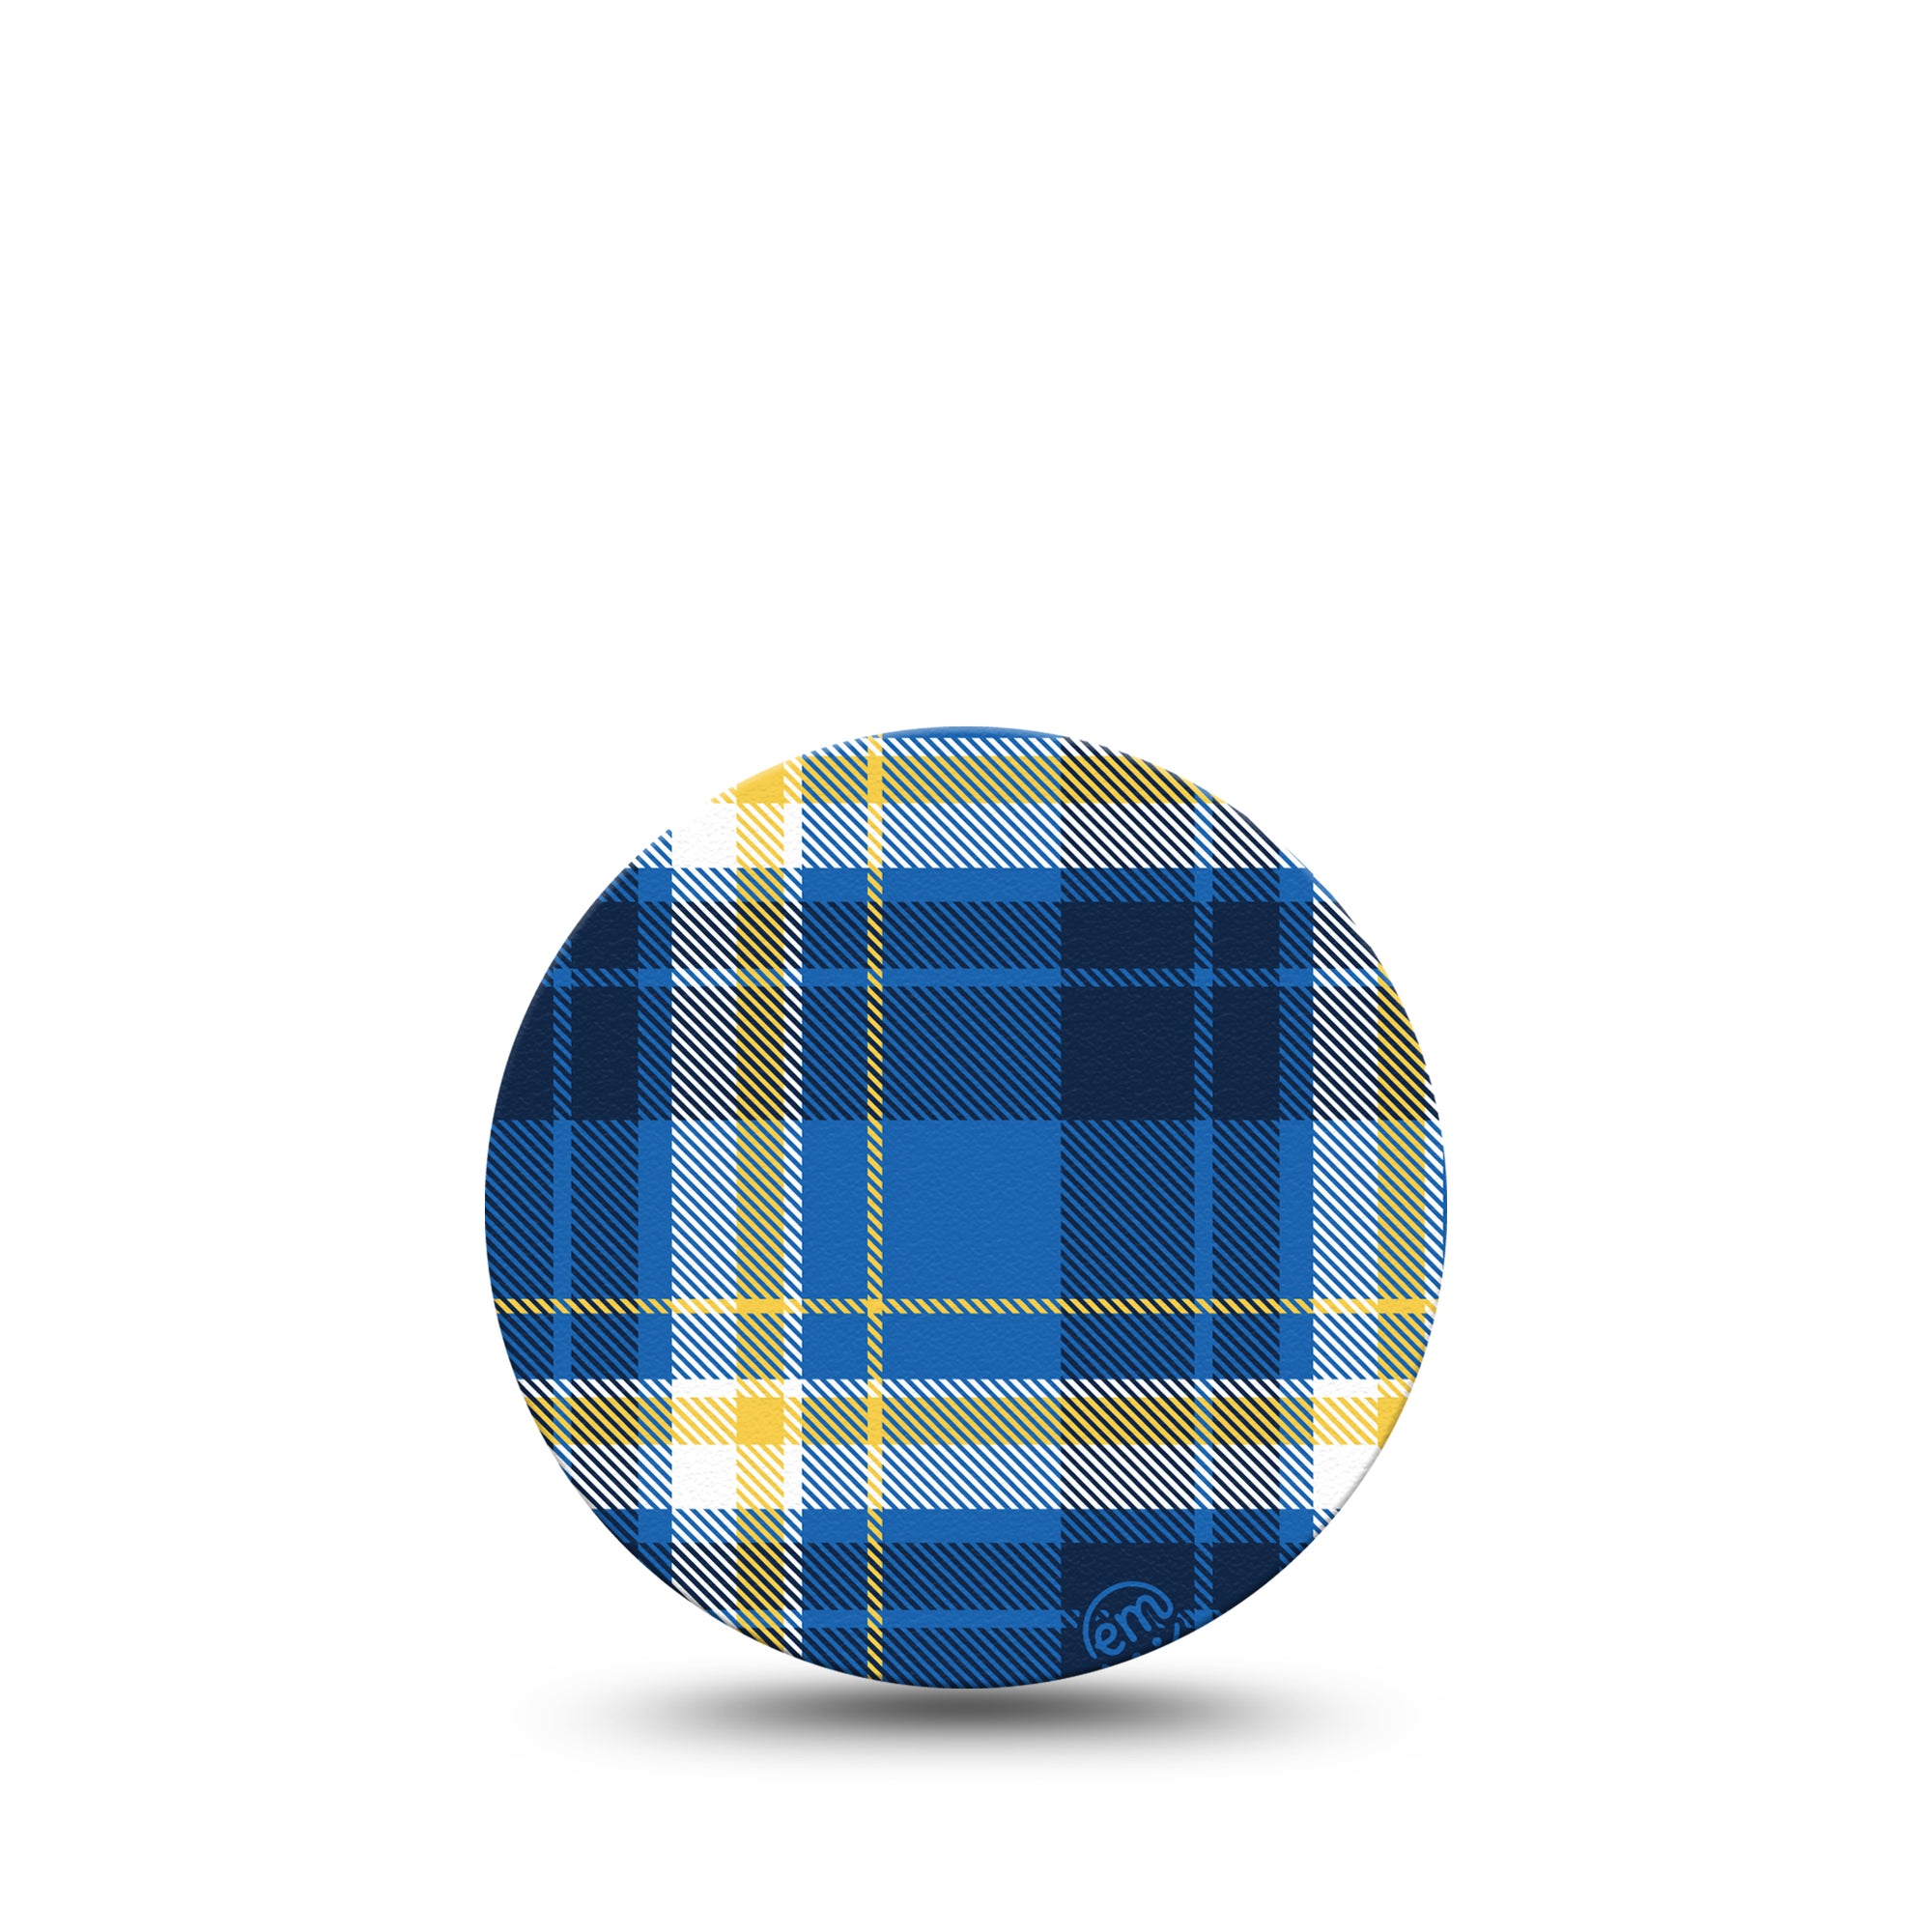 Blue Plaid Libre 3 Overpatch, Single, Shades of Blue and Yellow Plaid CGM Adhesive Tape Design